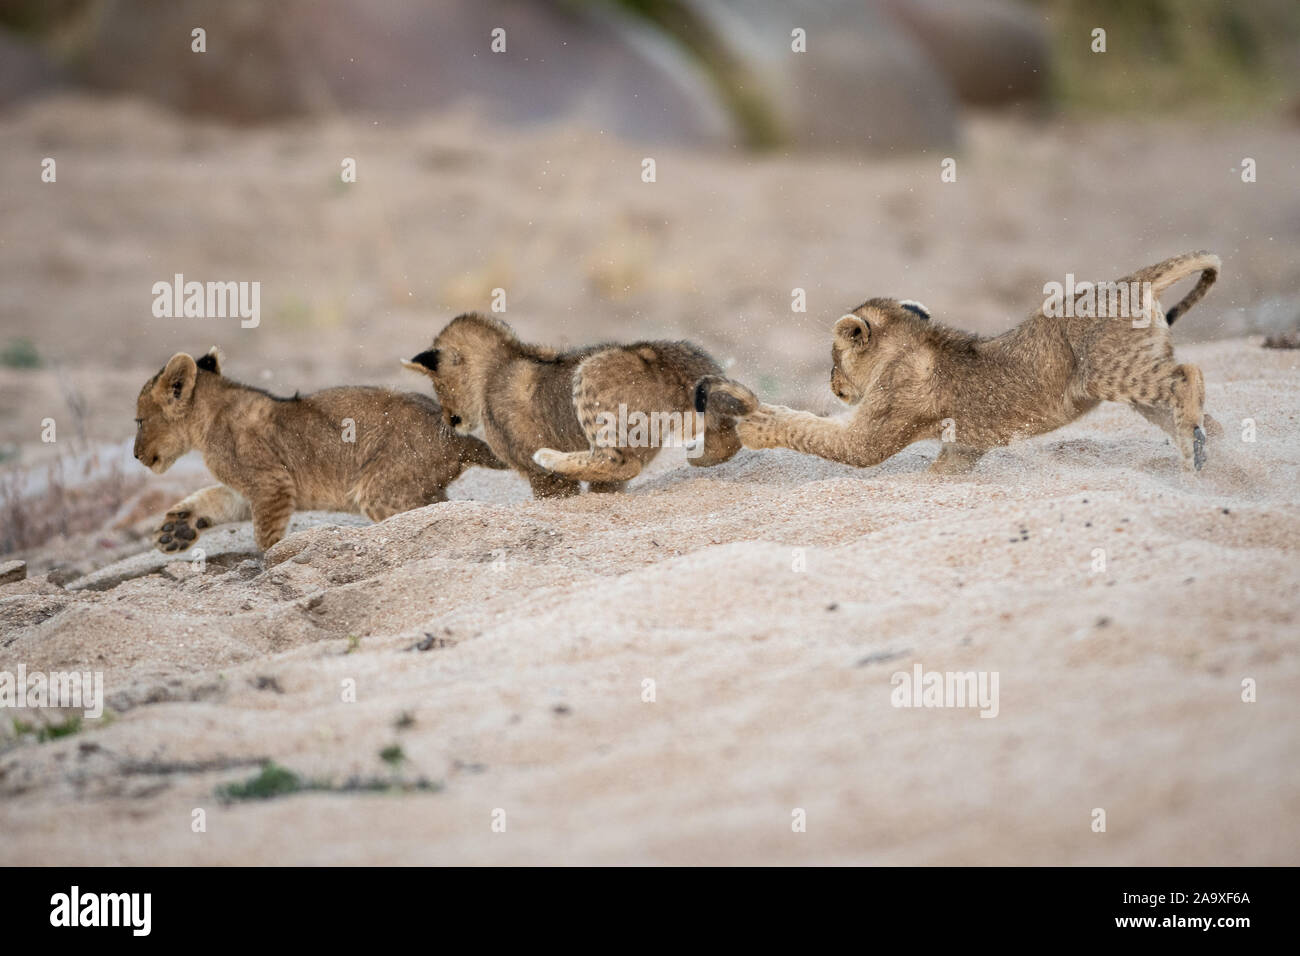 Three lion cubs, Panthera leo, play and chase each other in sand. Stock Photo